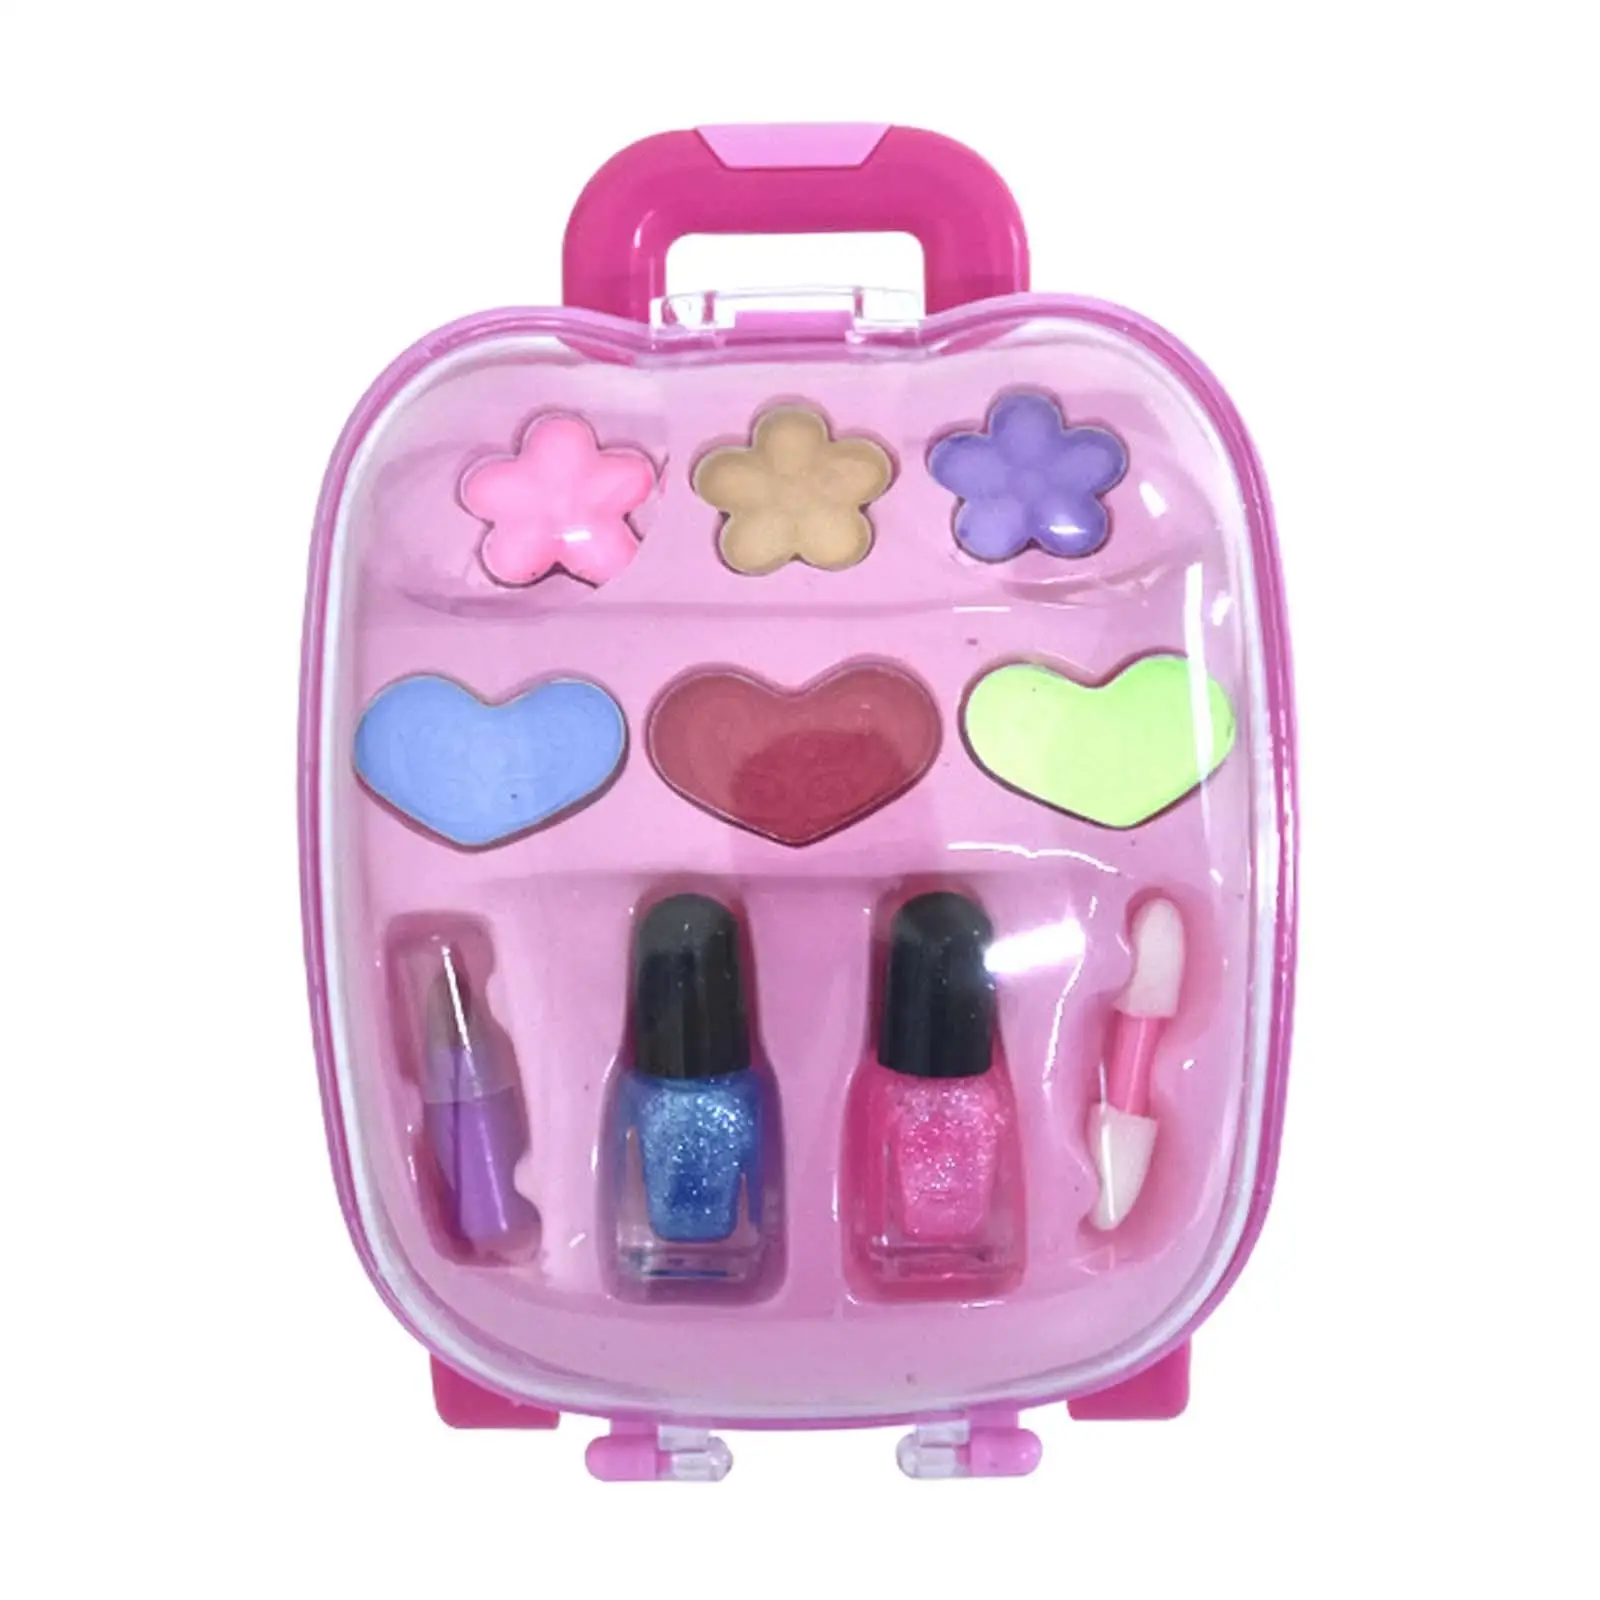 Princess Cosmetic Toy Pretend Cosmetic Makeup Accessories Kids Makeup Kits for Girls Kids Children Toddlers Birthday Toys Gift